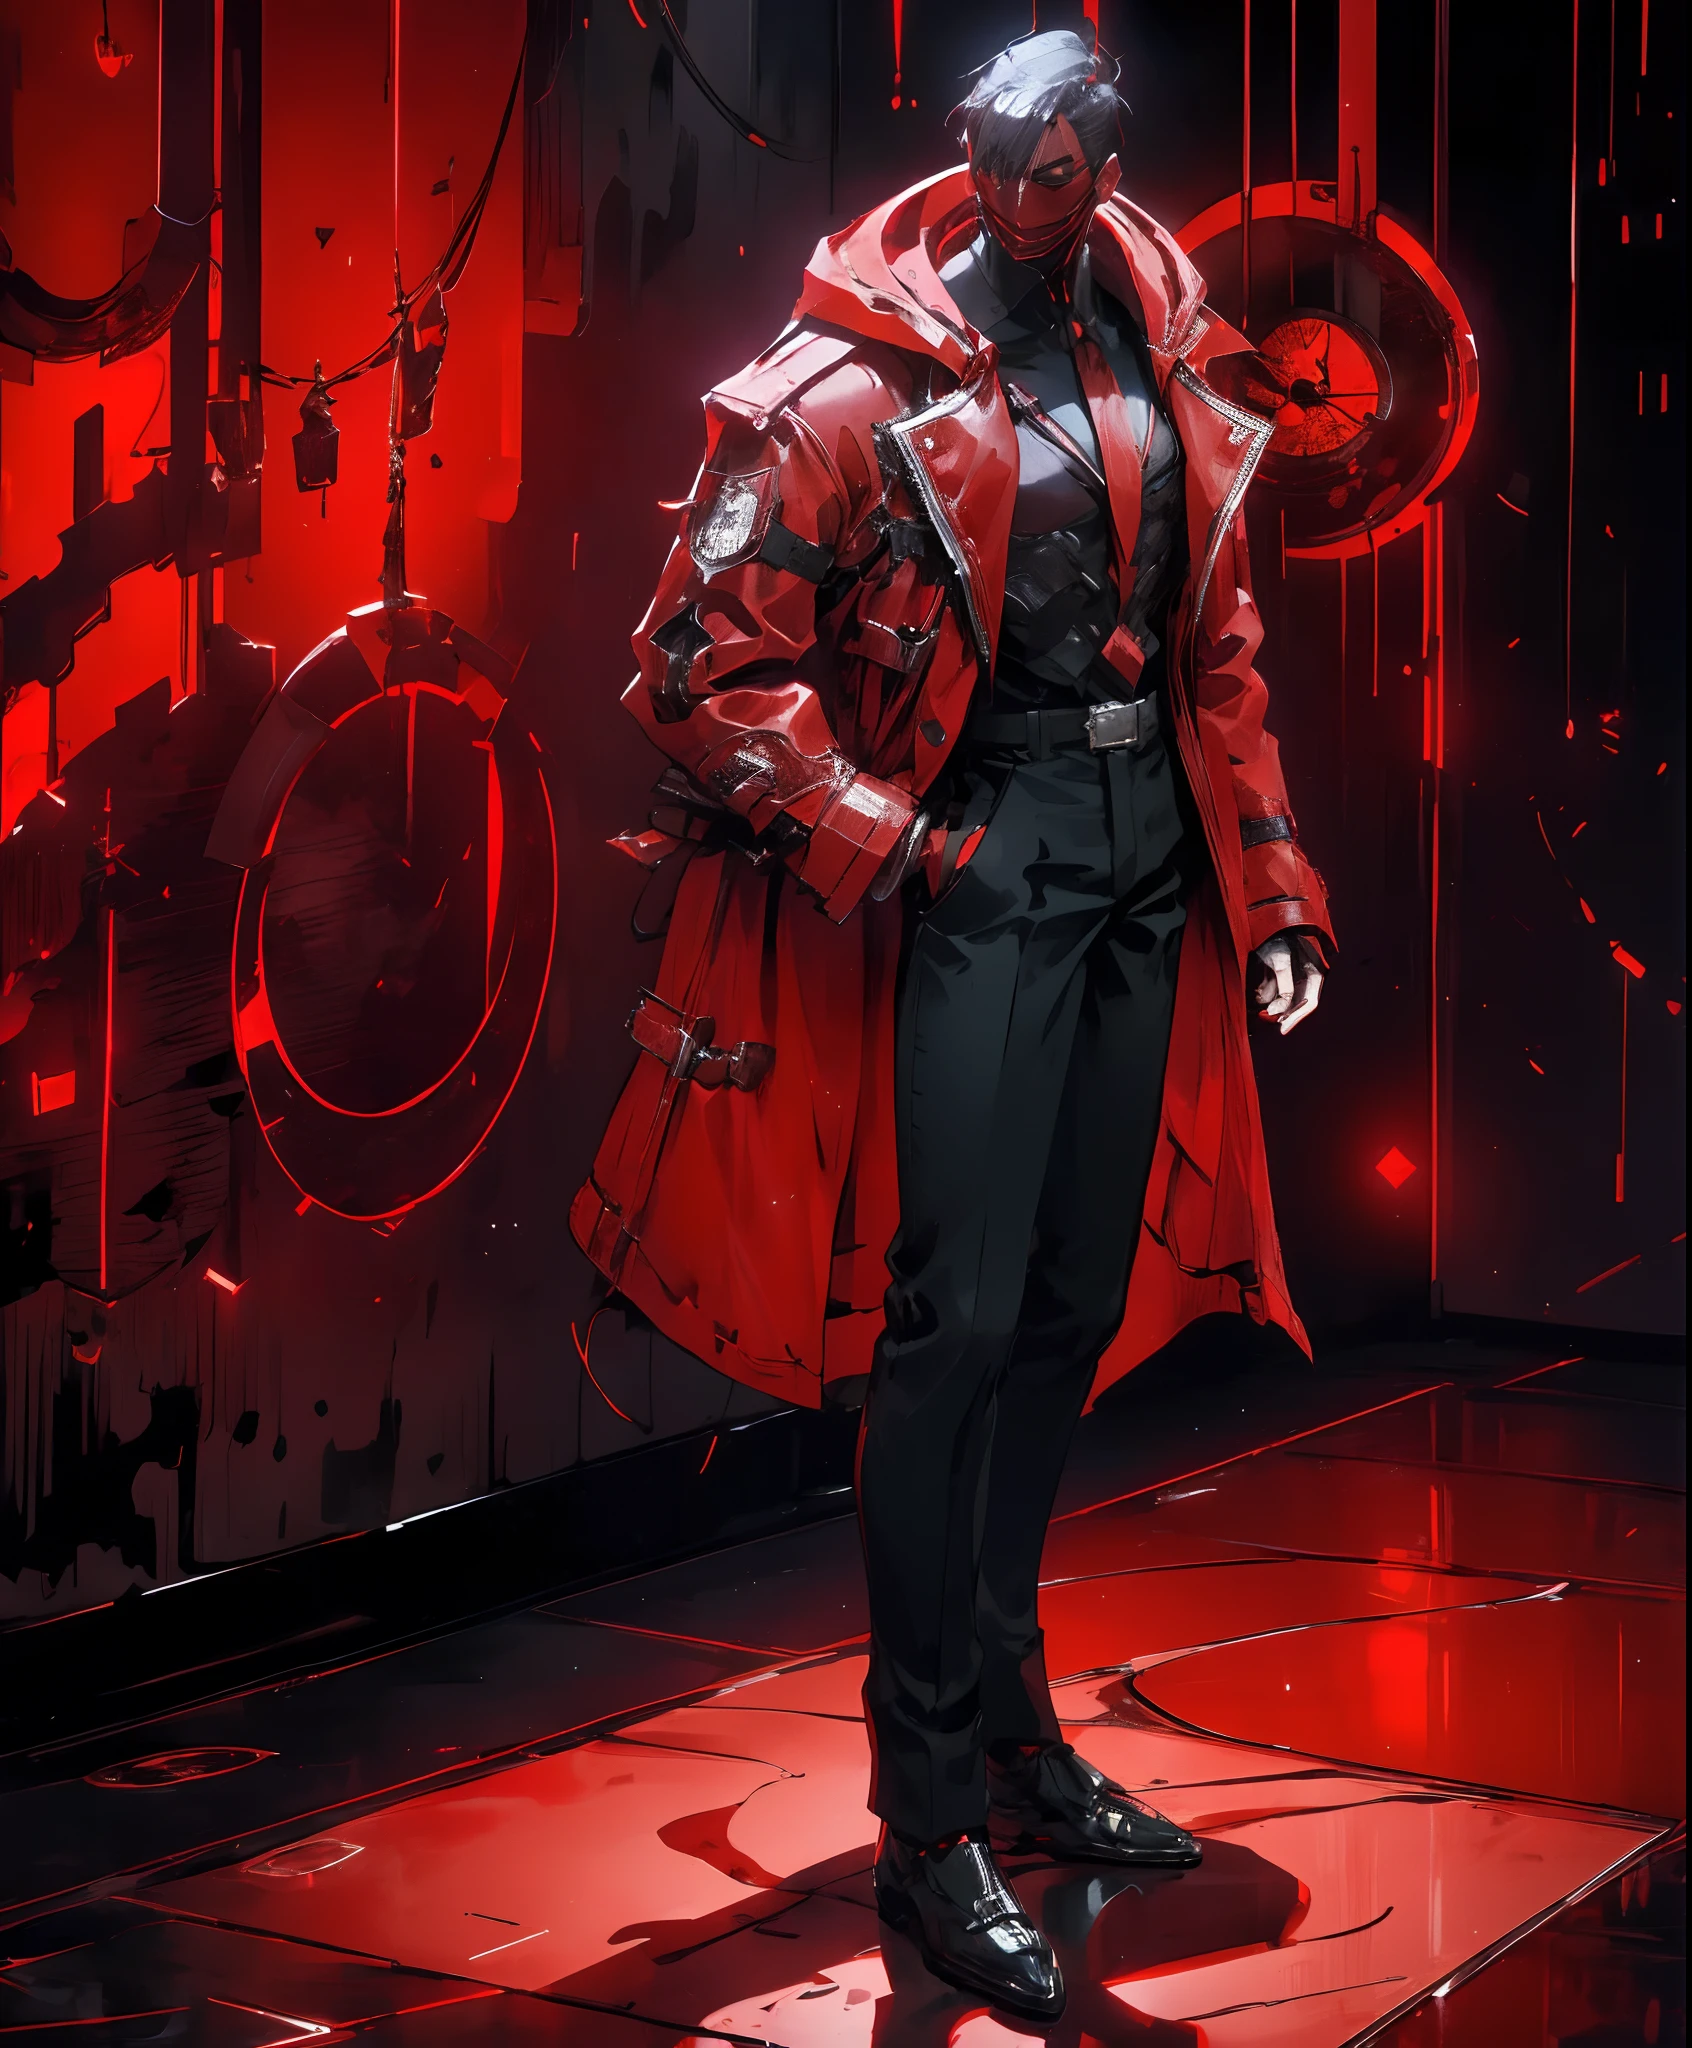 a man in a red jacket and black pants standing in a dark room, wearing cultist red robe, crimson attire, character from mortal kombat, as a character in tekken, fighting game character, cyberpunk assassin, red hooded mage, cyberpunk outfits, crimson clothes, the red ninja, wearing leather assassin armor, an edgy teen assassin, cool red jacket, cyberpunk street goon